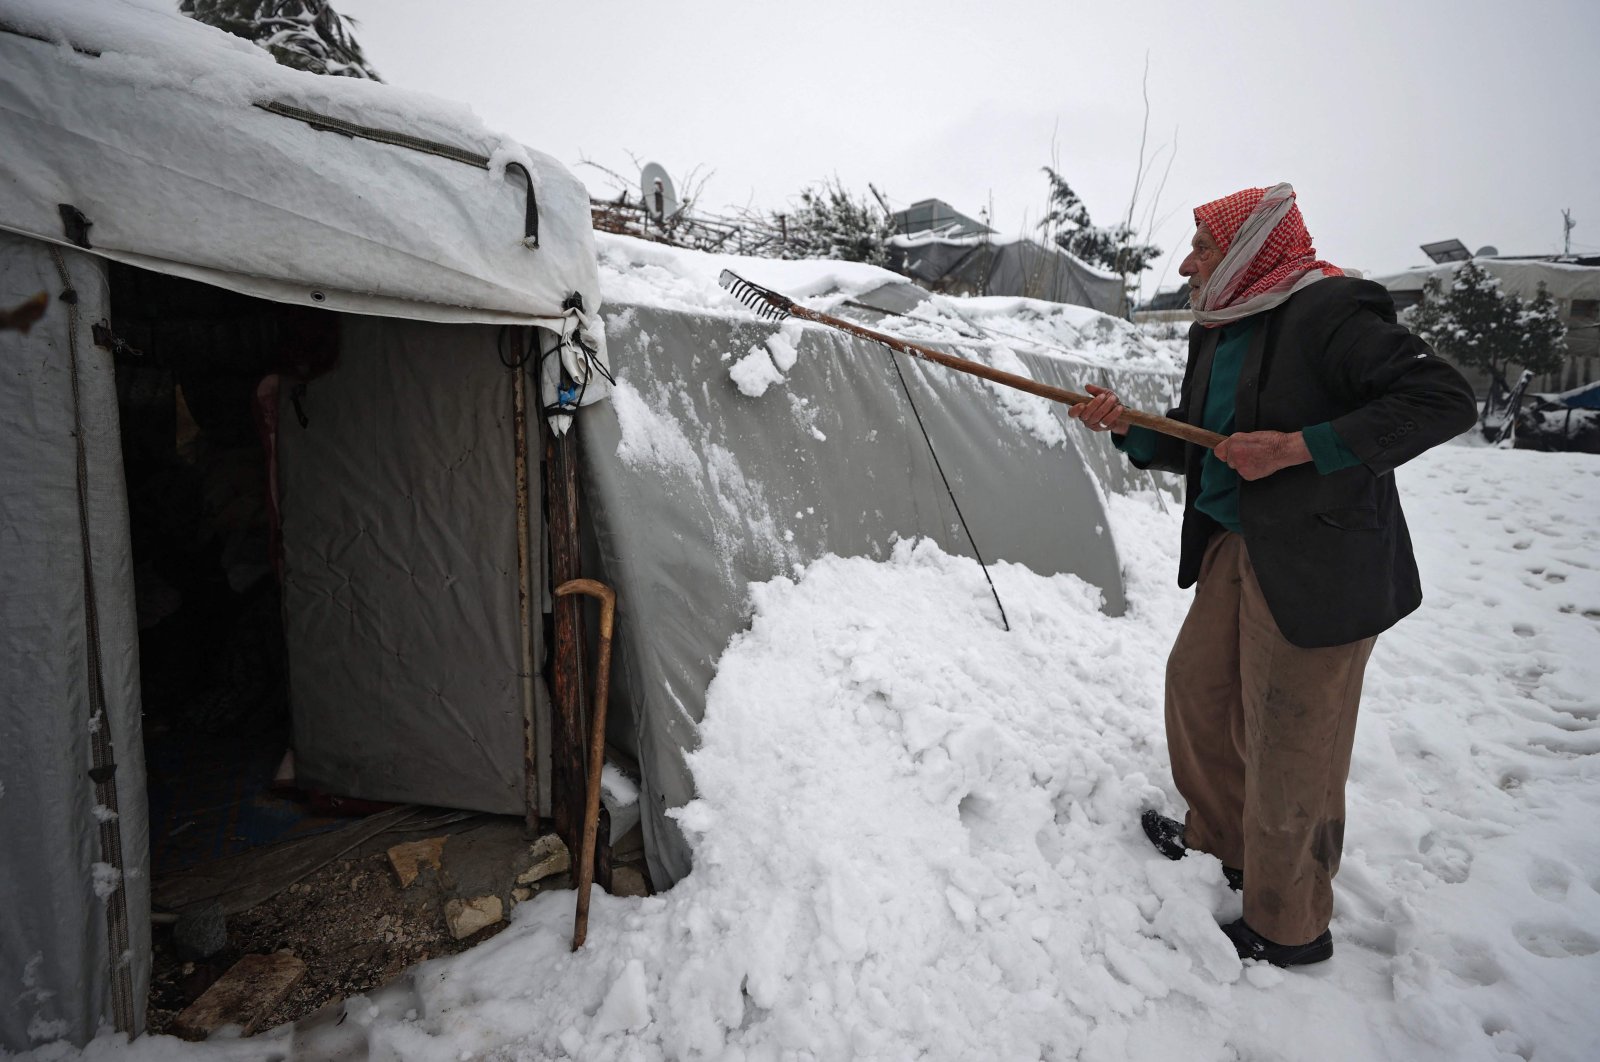 A Syrian clears snow from outside his tent at a camp for the internally displaced in near the village of Zawf, near the city of Jisr al-Shughur in Syria's northwestern province of Idlib by the border with Turkey, on January 26, 2022. (Photo by OMAR HAJ KADOUR / AFP)